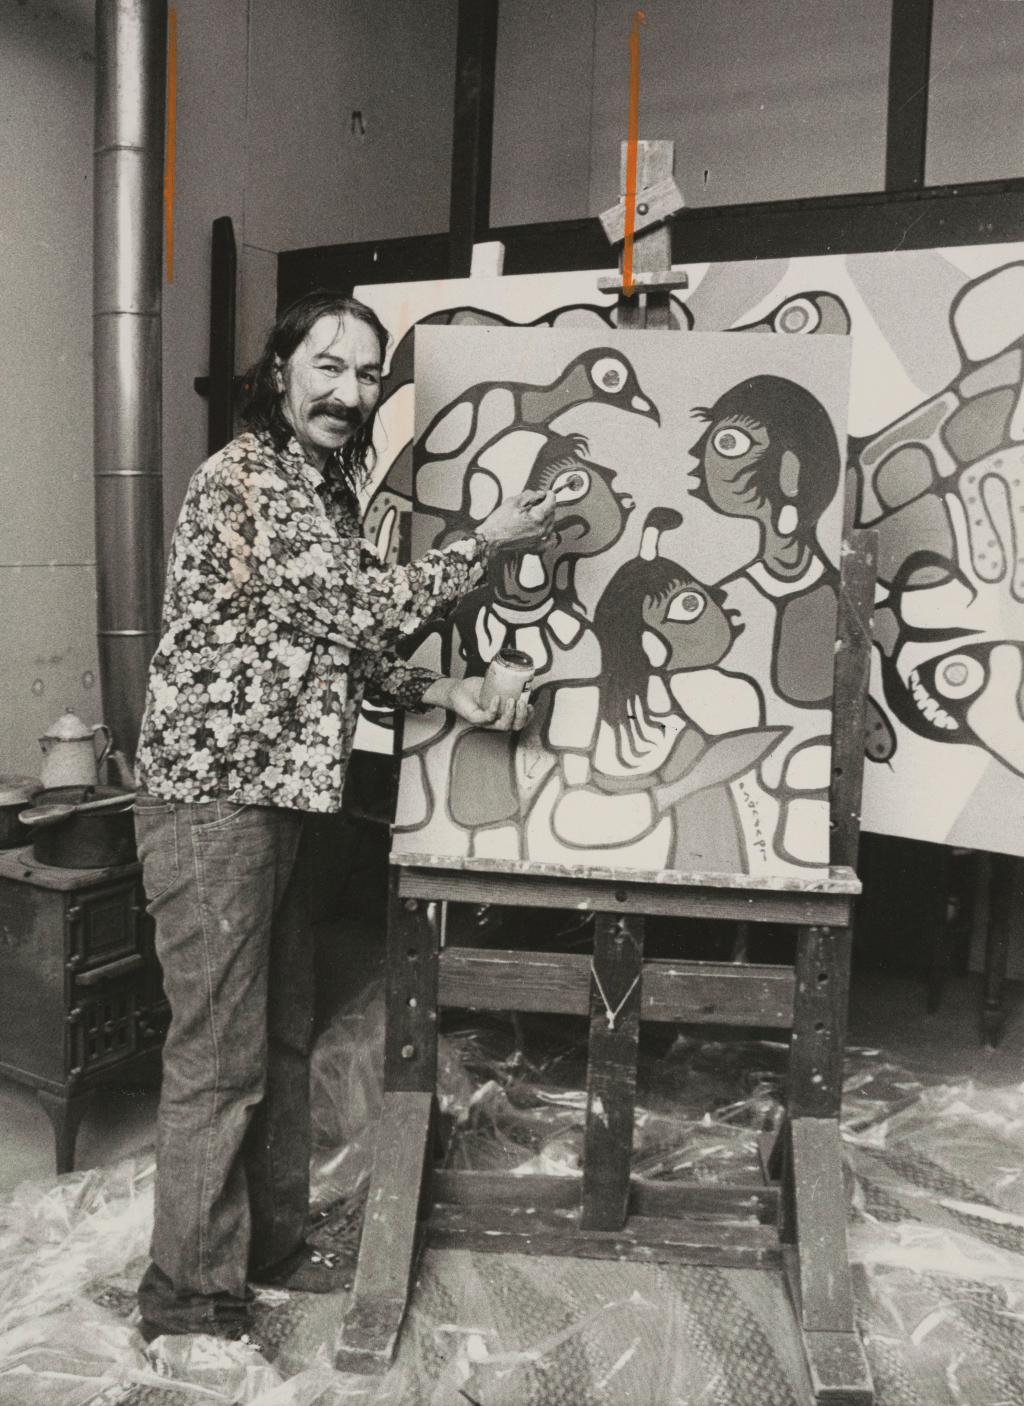 Photograph of Morrisseau in front of a painting